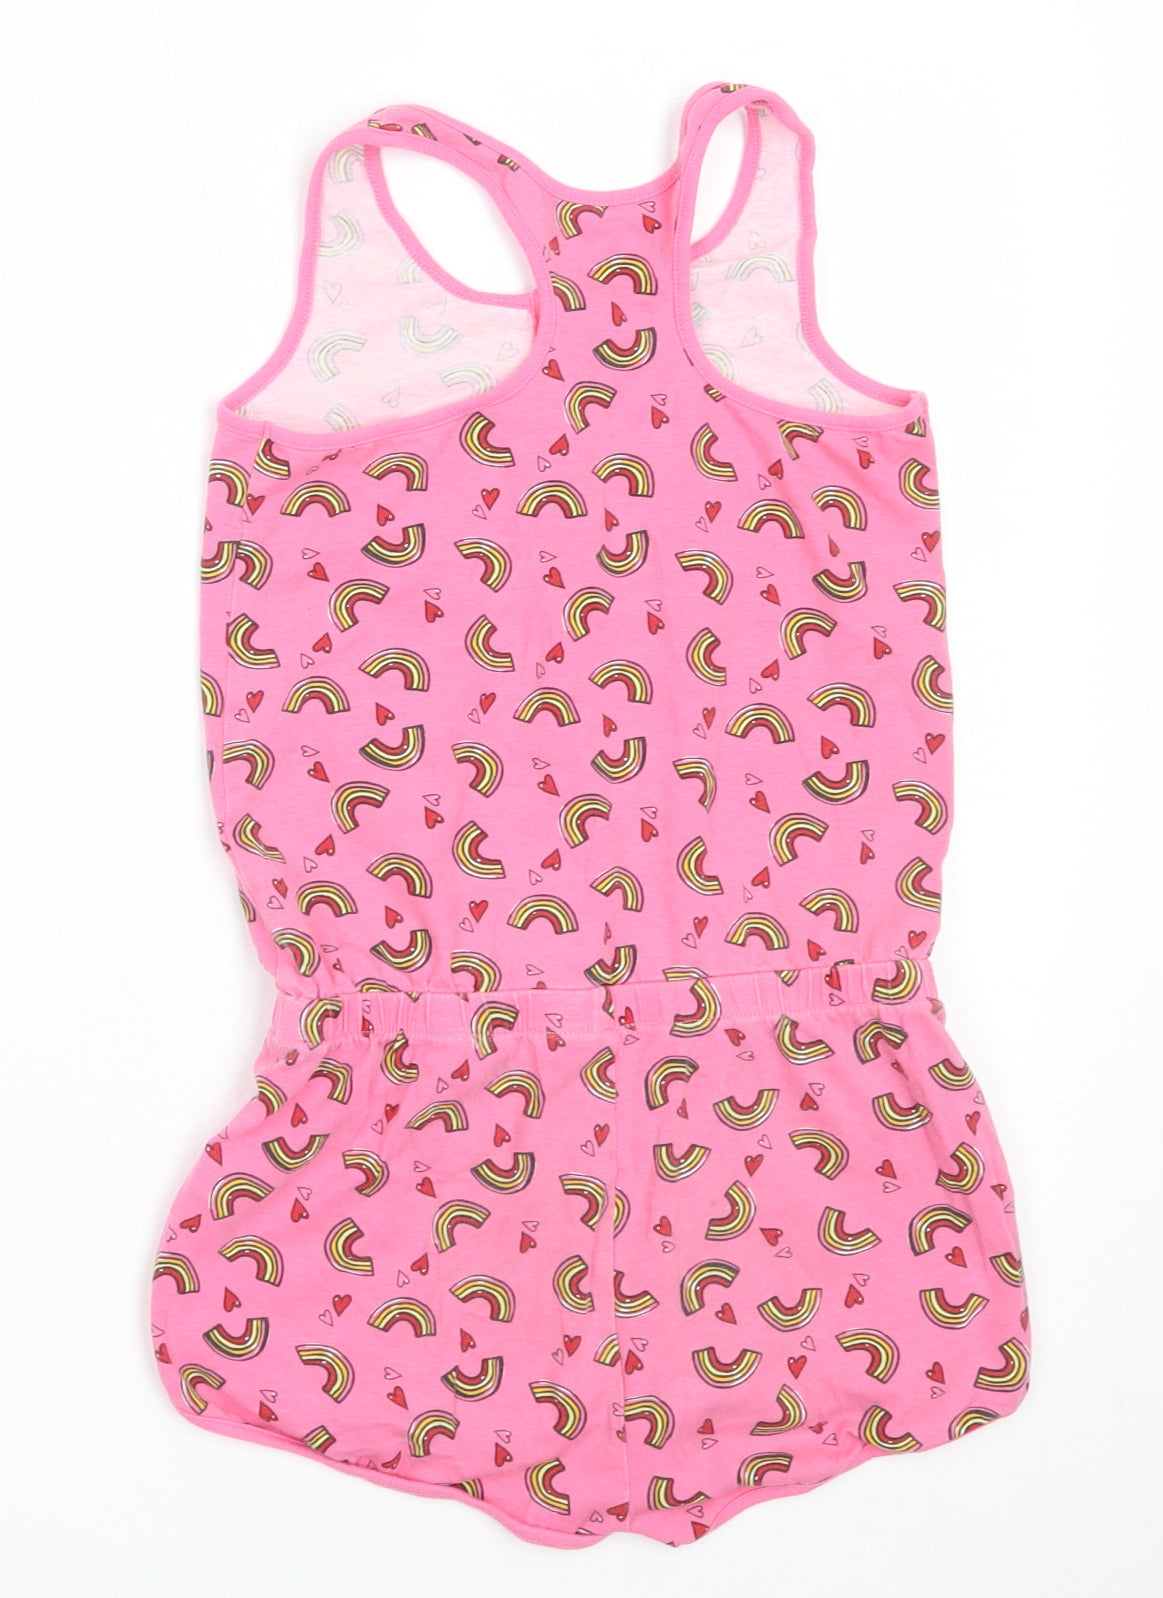 Pepperts! Girls Pink Solid Cotton Top One Piece Size 7-8 Years